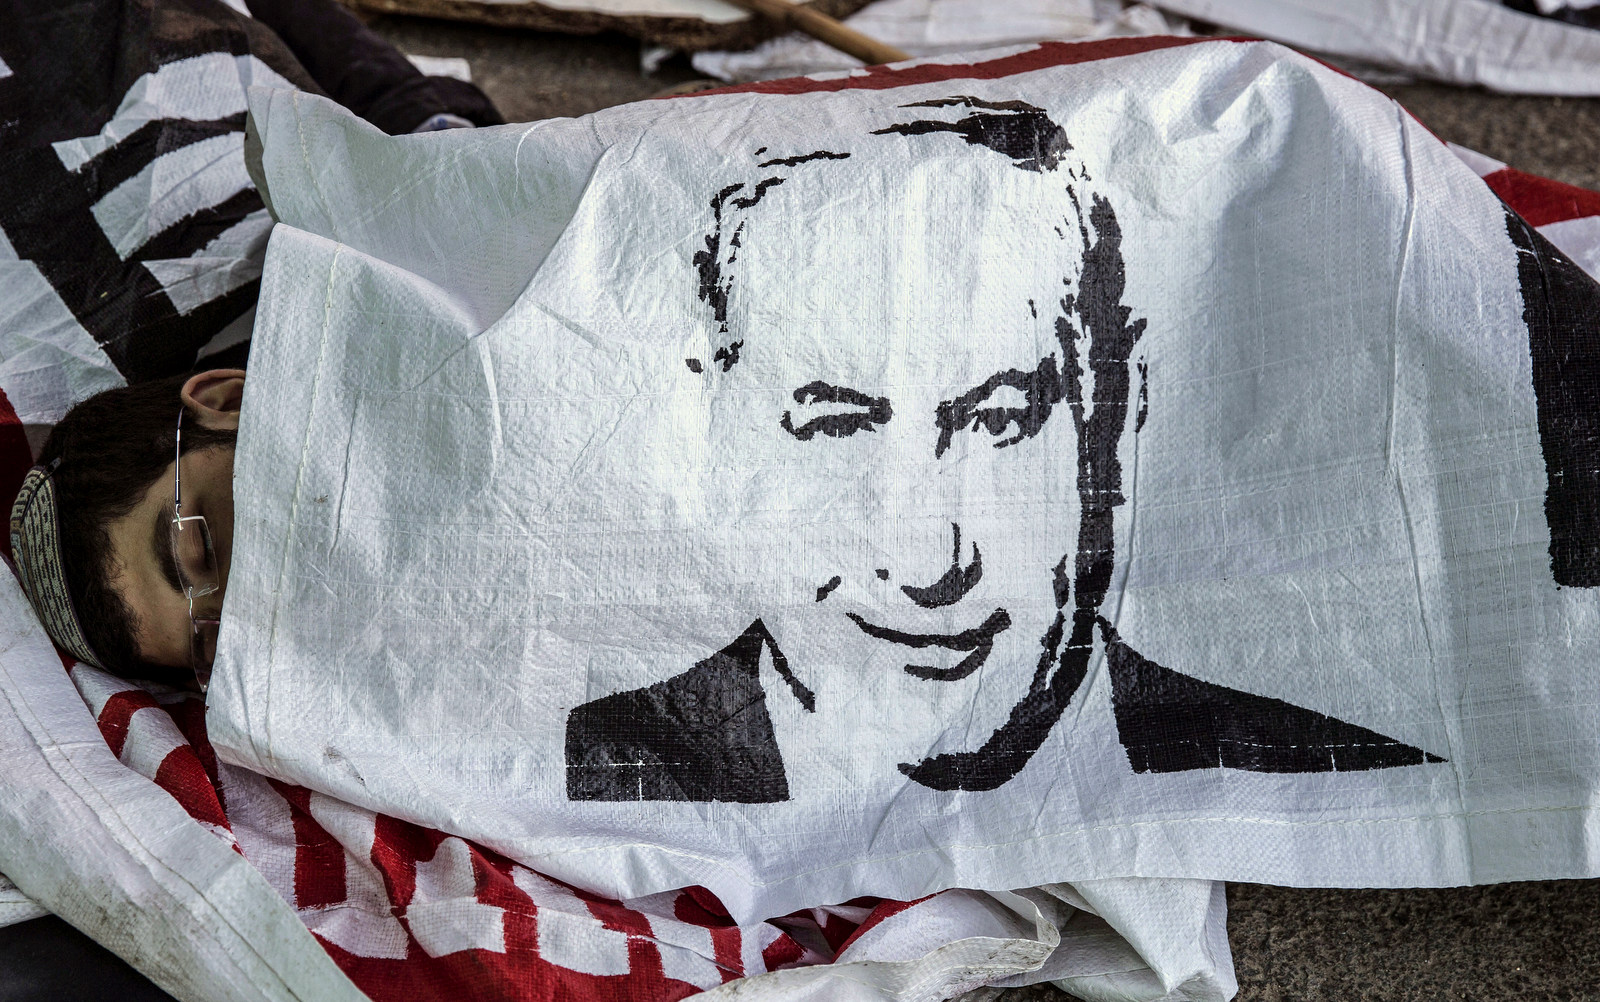 An Israeli settler sleeps under a banner of Israeli Prime Minister Benjamin Netanyahu, in the Jewish settlement of Beit El after a night stand off with police, near the West Bank town of Ramallah, Wednesday, July 29, 2015. The Israeli Prime Minister's office said Wednesday it has approved the "immediate construction" of 300 housing units in the West Bank settlement of Beit El. The announcement came amid a standoff, where Israeli settlers clashed with Israeli forces as authorities began to dismantle the contested West Bank settlement housing complex after Israel's Supreme Court ruled Wednesday that it must be demolished. (AP Photo/Tsafrir Abayov)